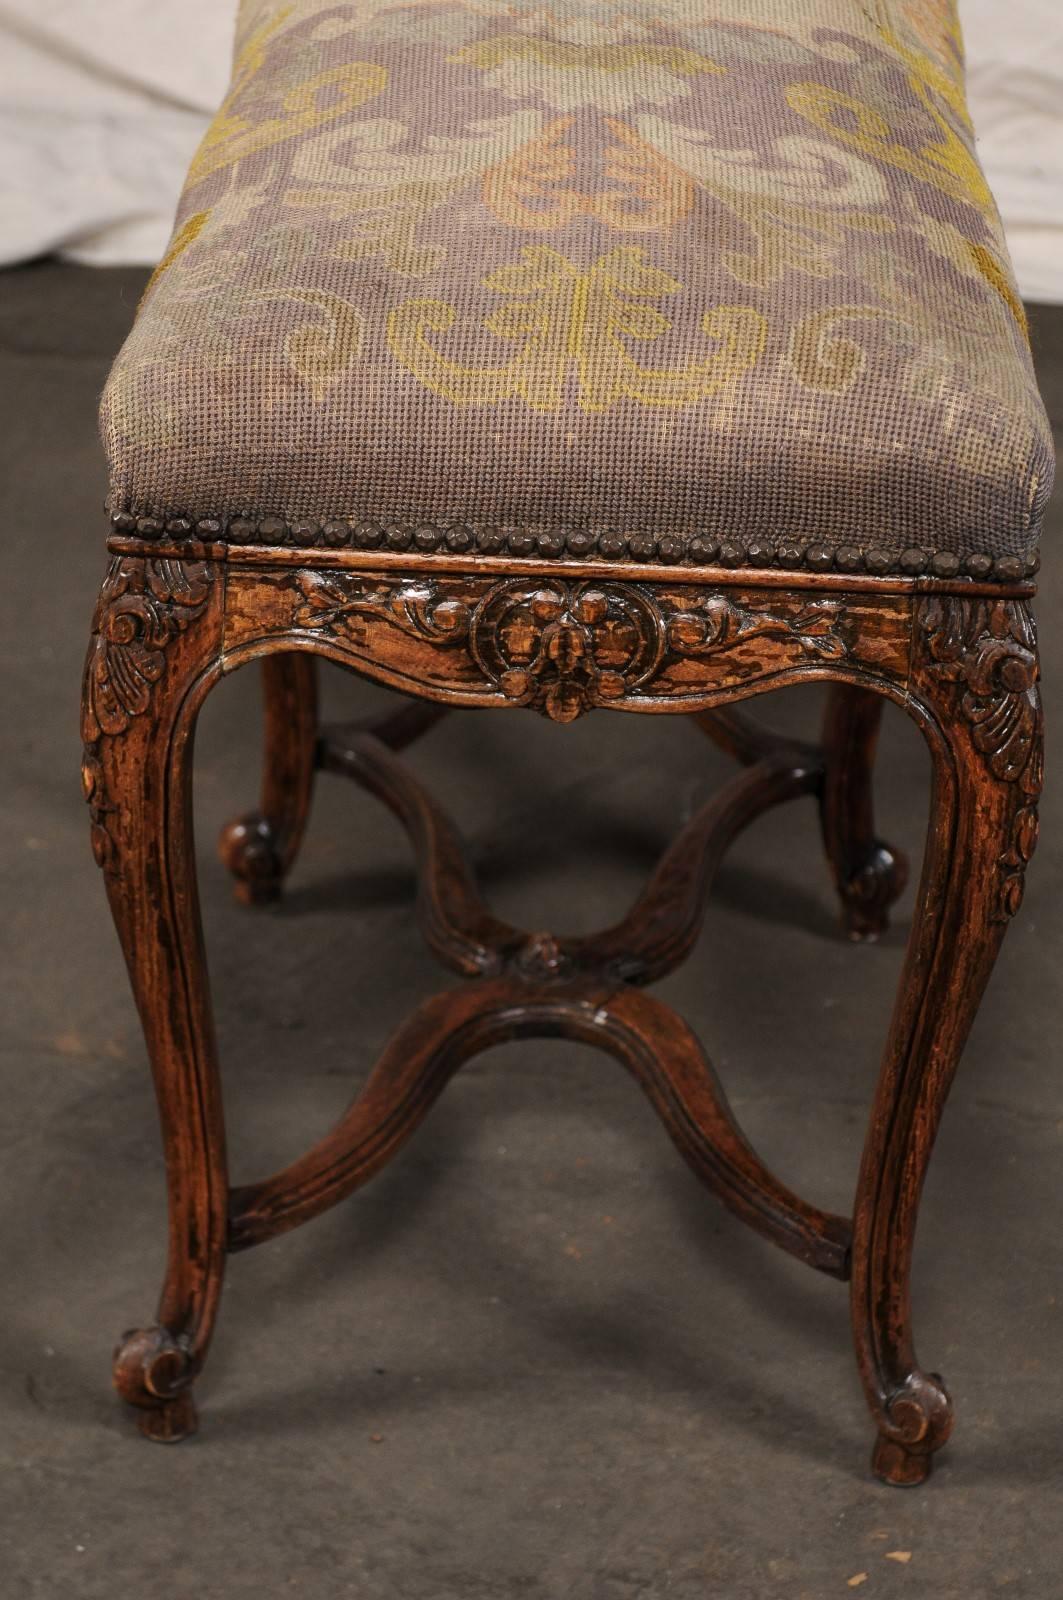 19th-20th Century French Louis XV Style Needlepoint Bench 1